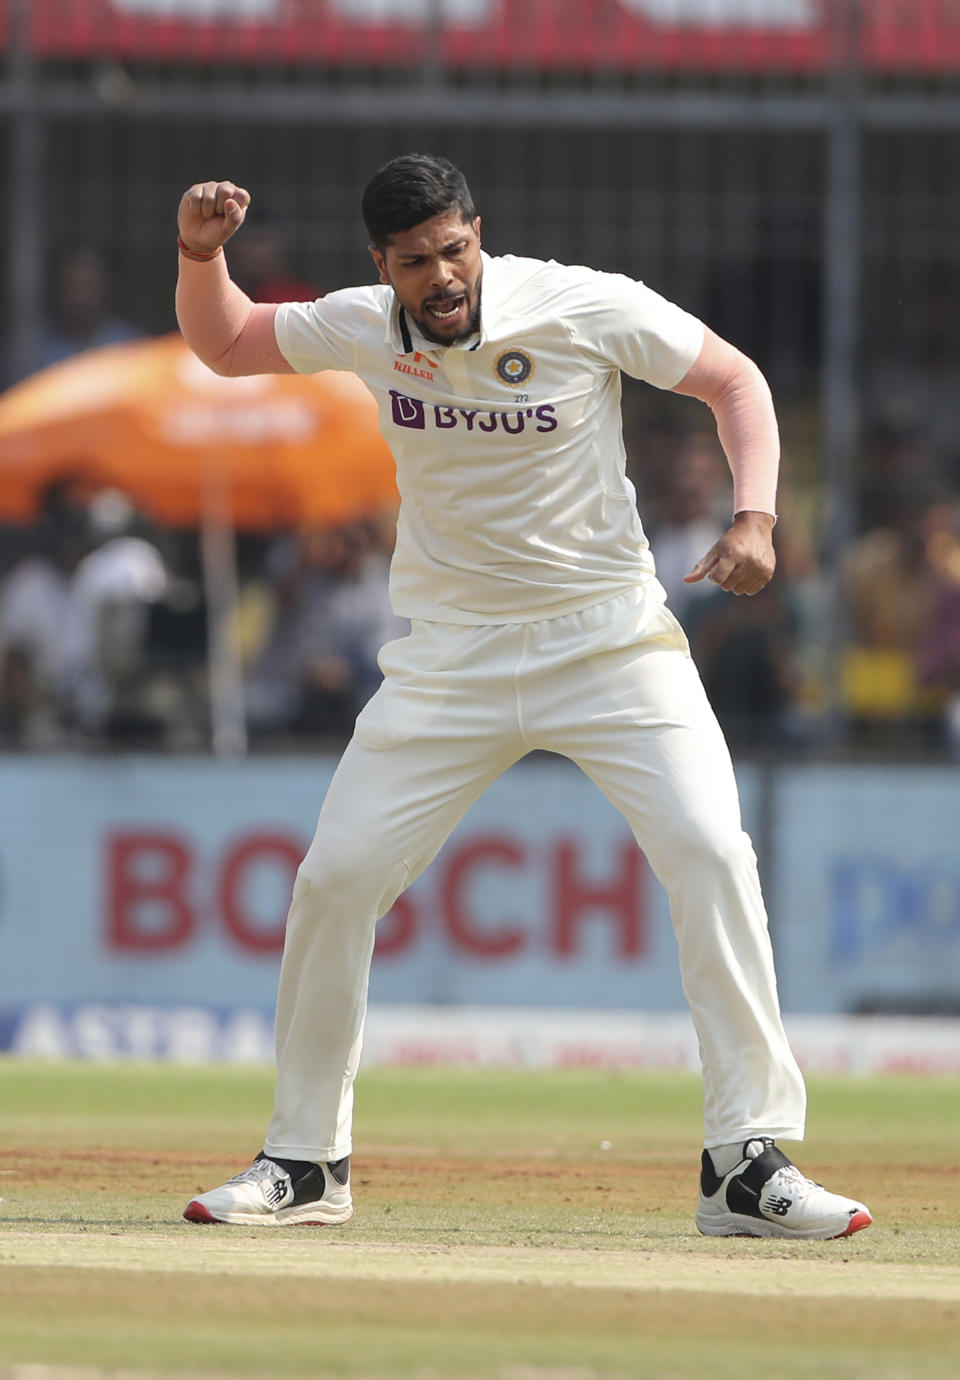 India's Umesh Yadav celebrates dismissal of Australia's Cameron Green during the second day of third cricket test match between India and Australia in Indore, India, Thursday, March 2, 2023. (AP Photo/Surjeet Yadav)